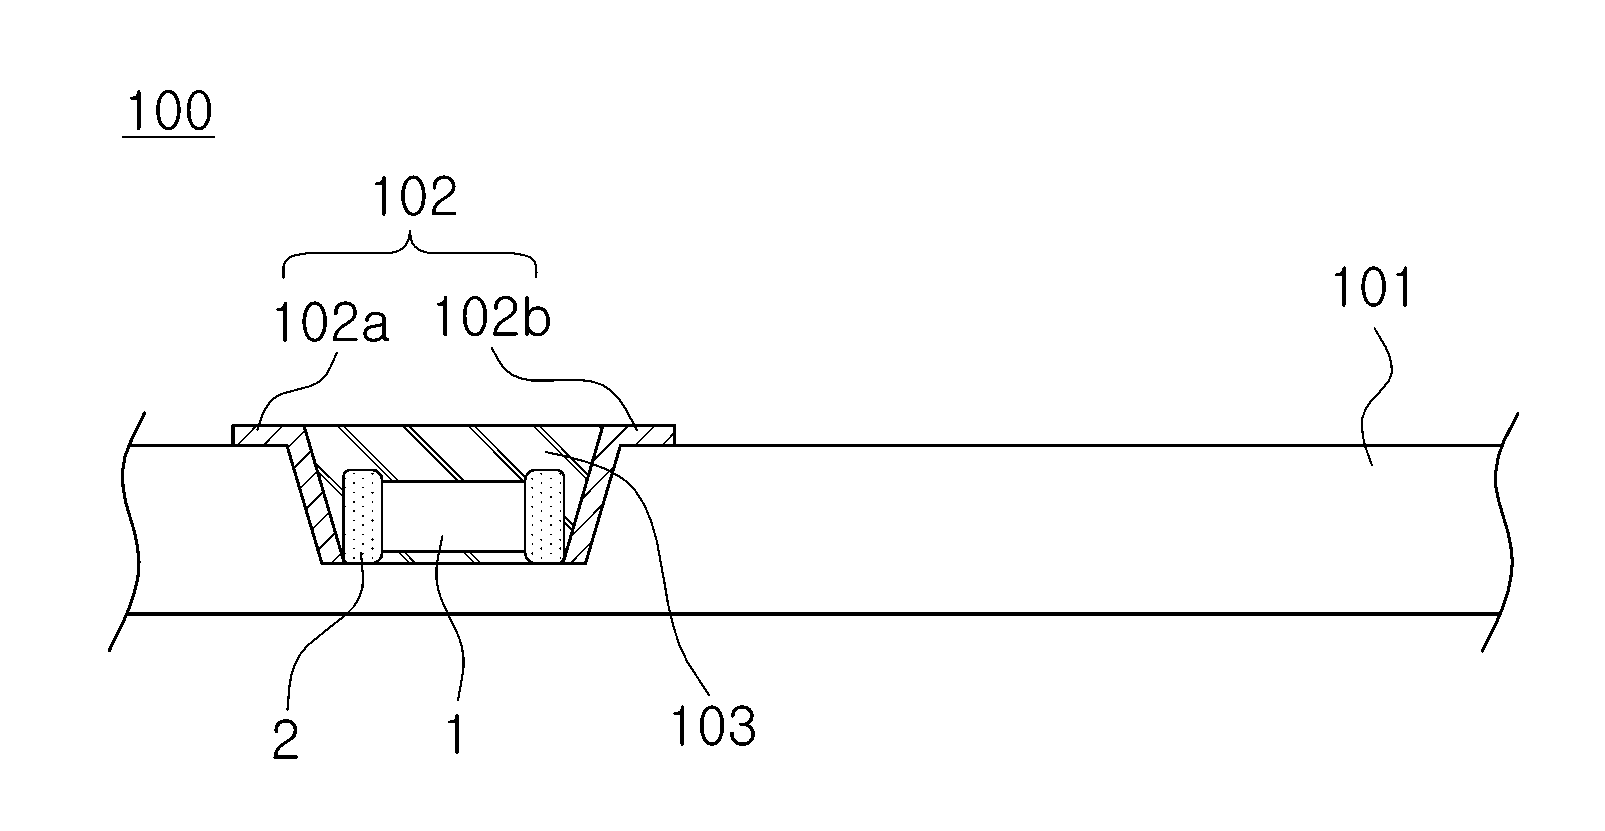 Multilayer ceramic capacitor, printed circuit board including the same, methods of manufacturing thereof